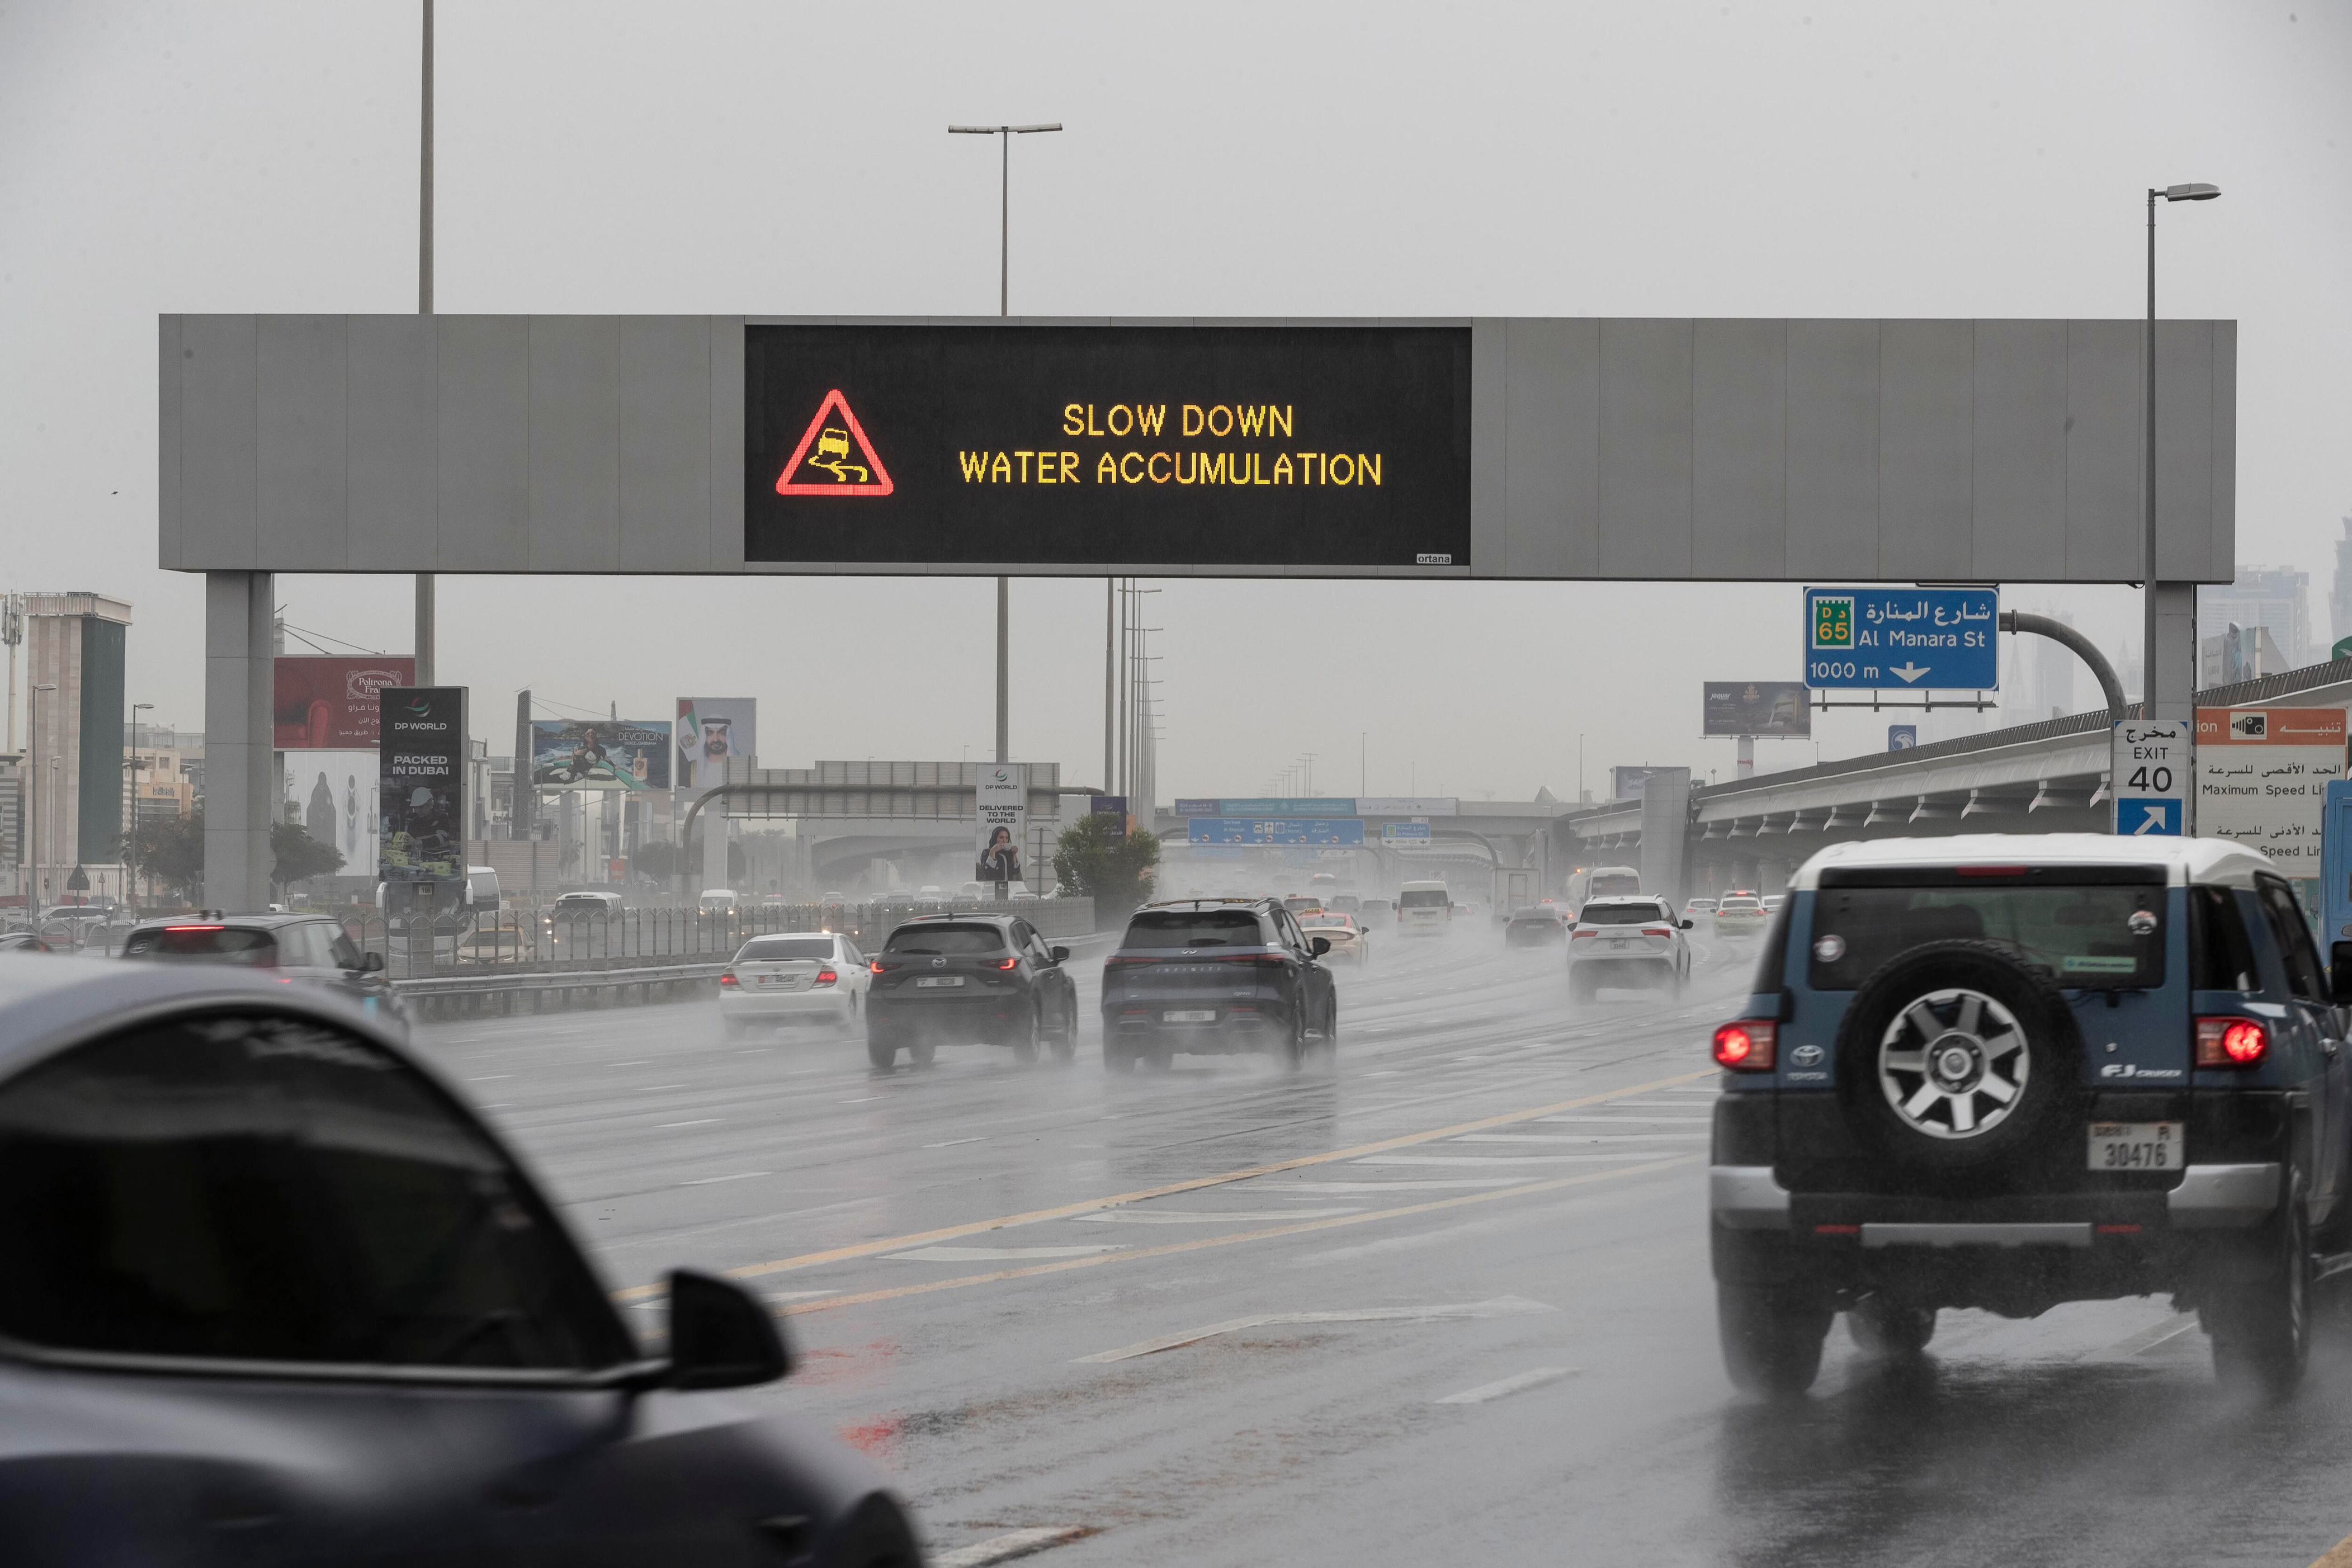 heavy rain forecast in parts of the uae this weekend and into next week